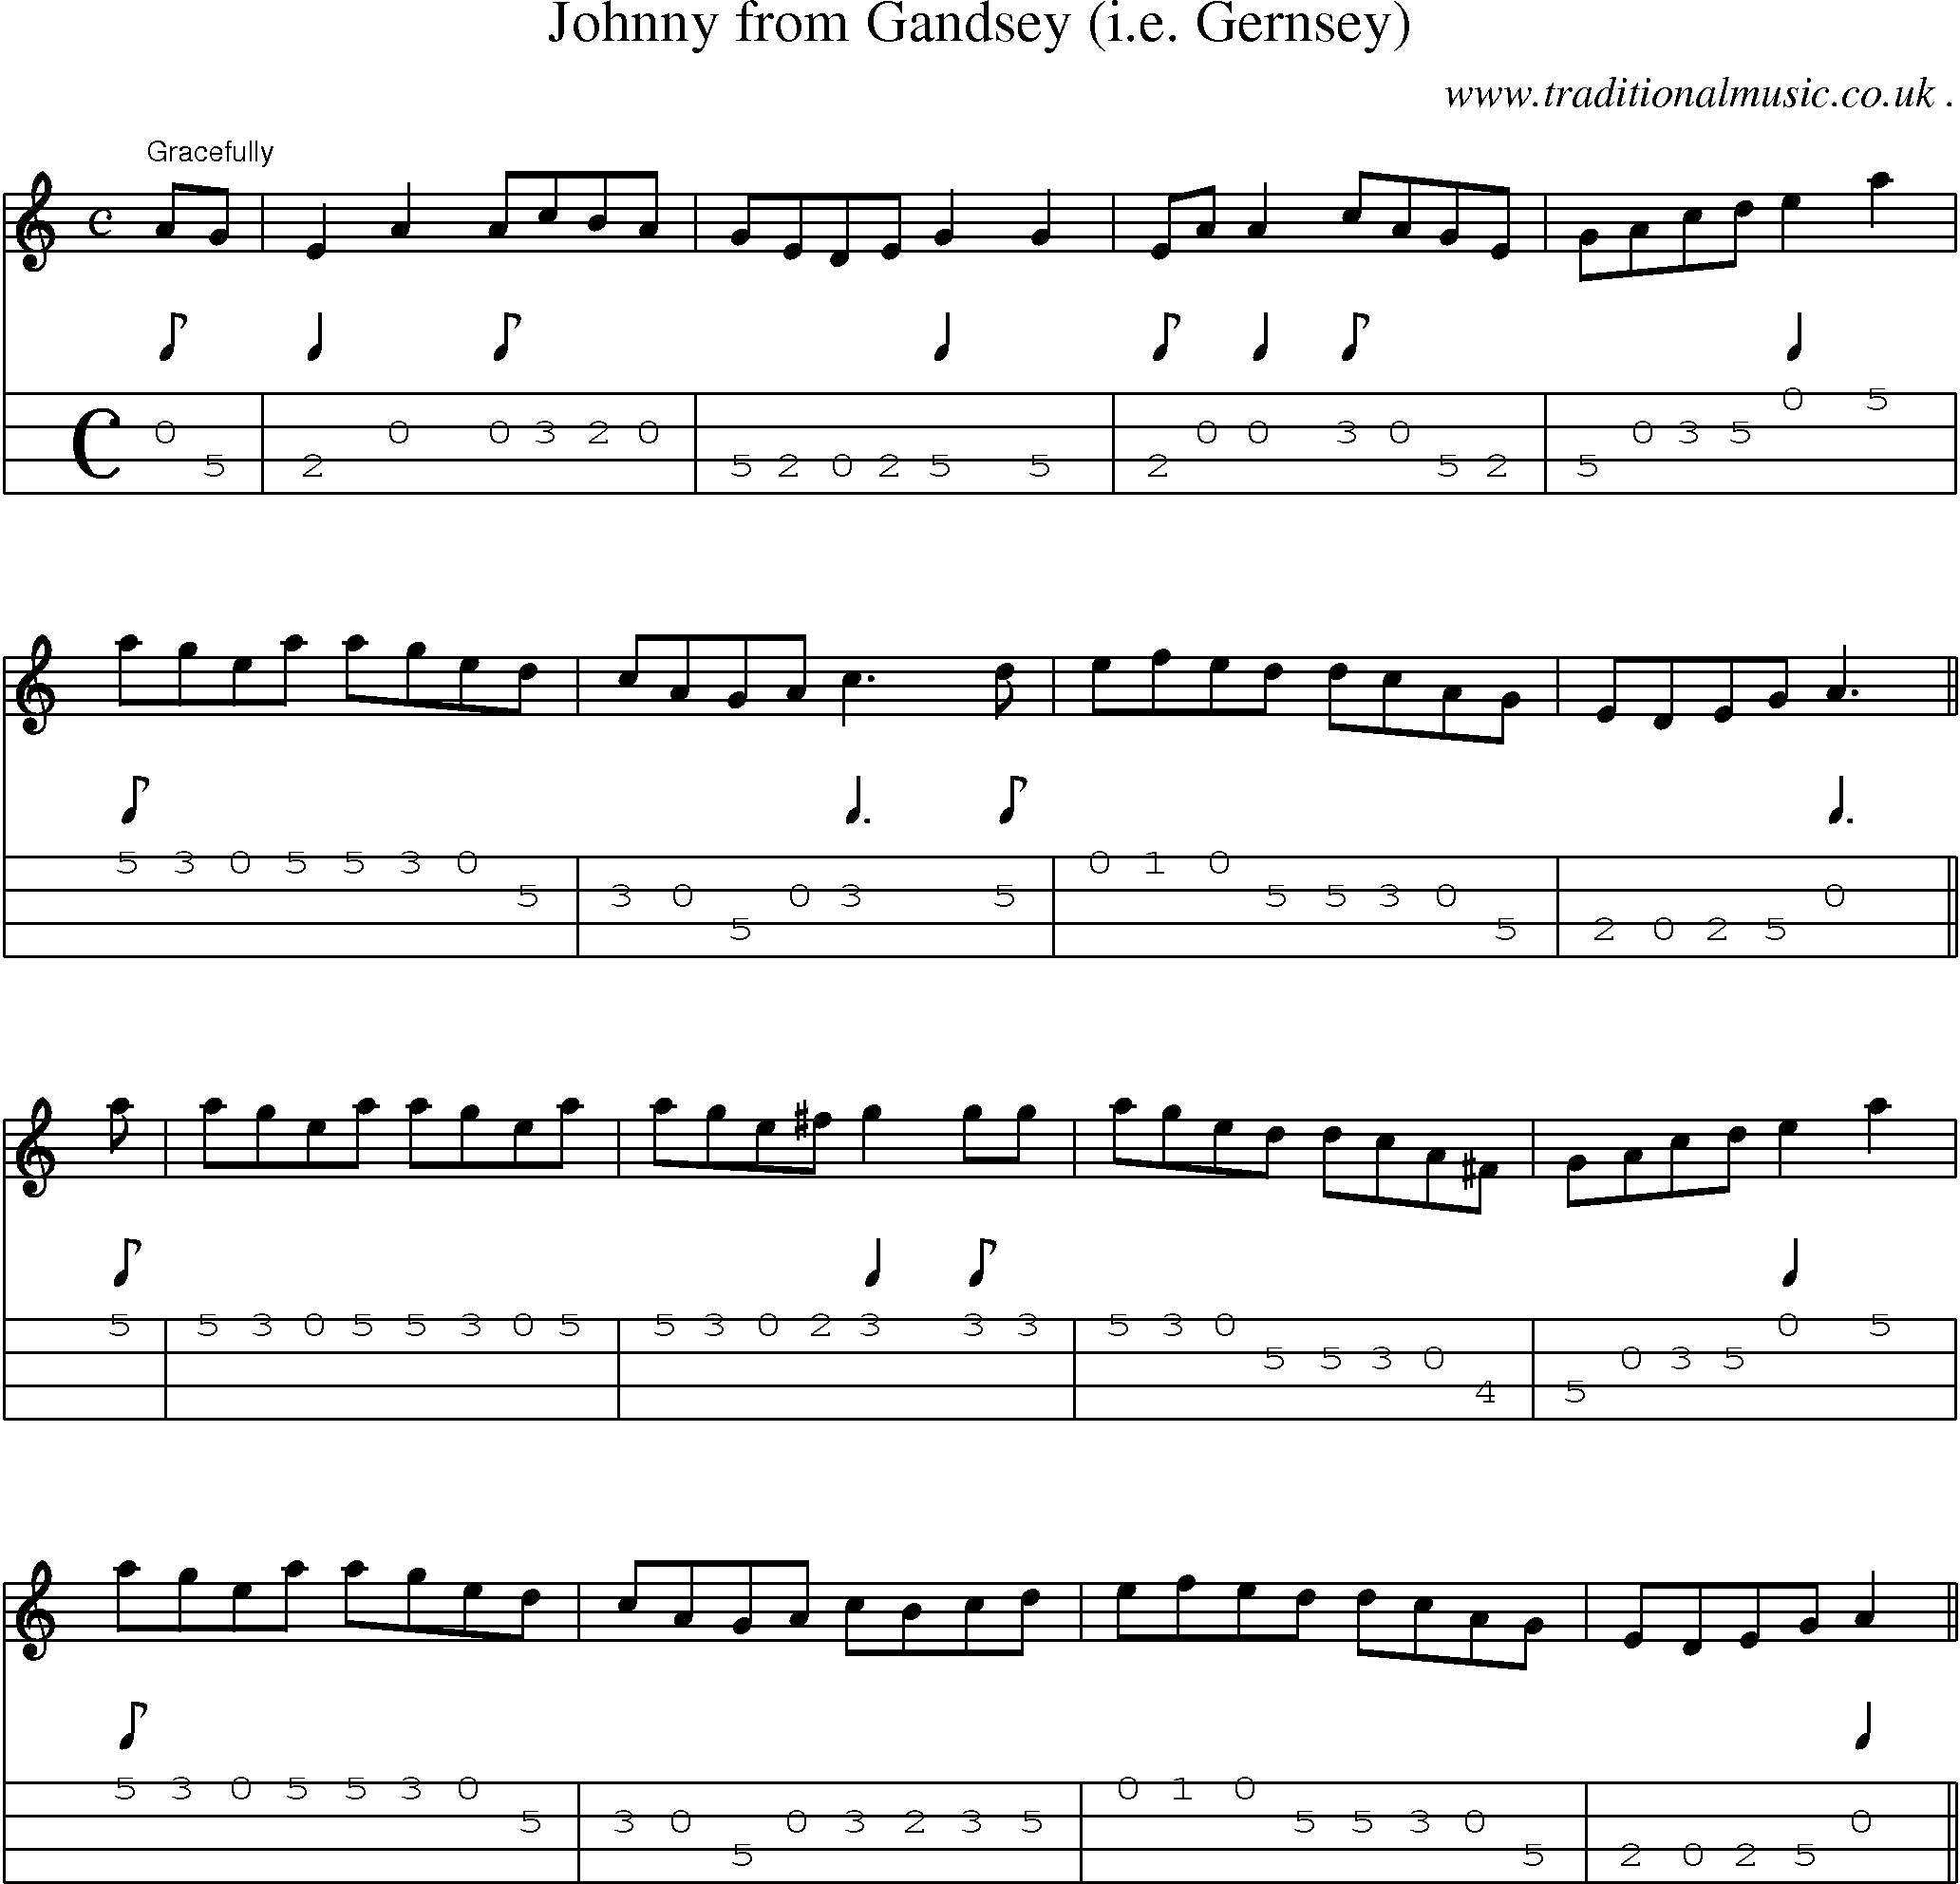 Sheet-Music and Mandolin Tabs for Johnny From Gandsey (ie Gernsey)